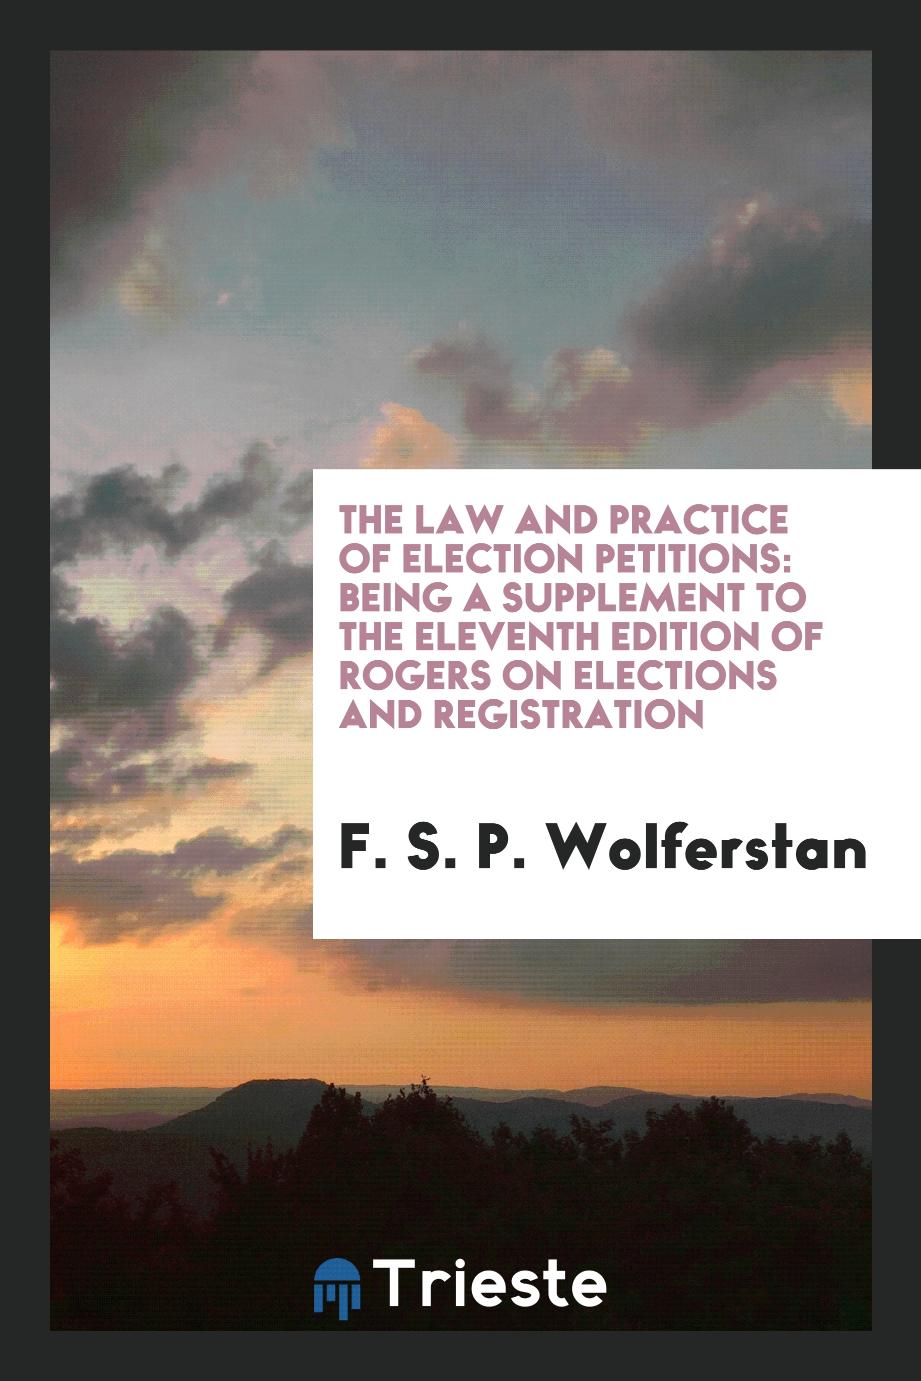 The Law and Practice of Election Petitions: Being a Supplement to the Eleventh Edition of Rogers on Elections and Registration